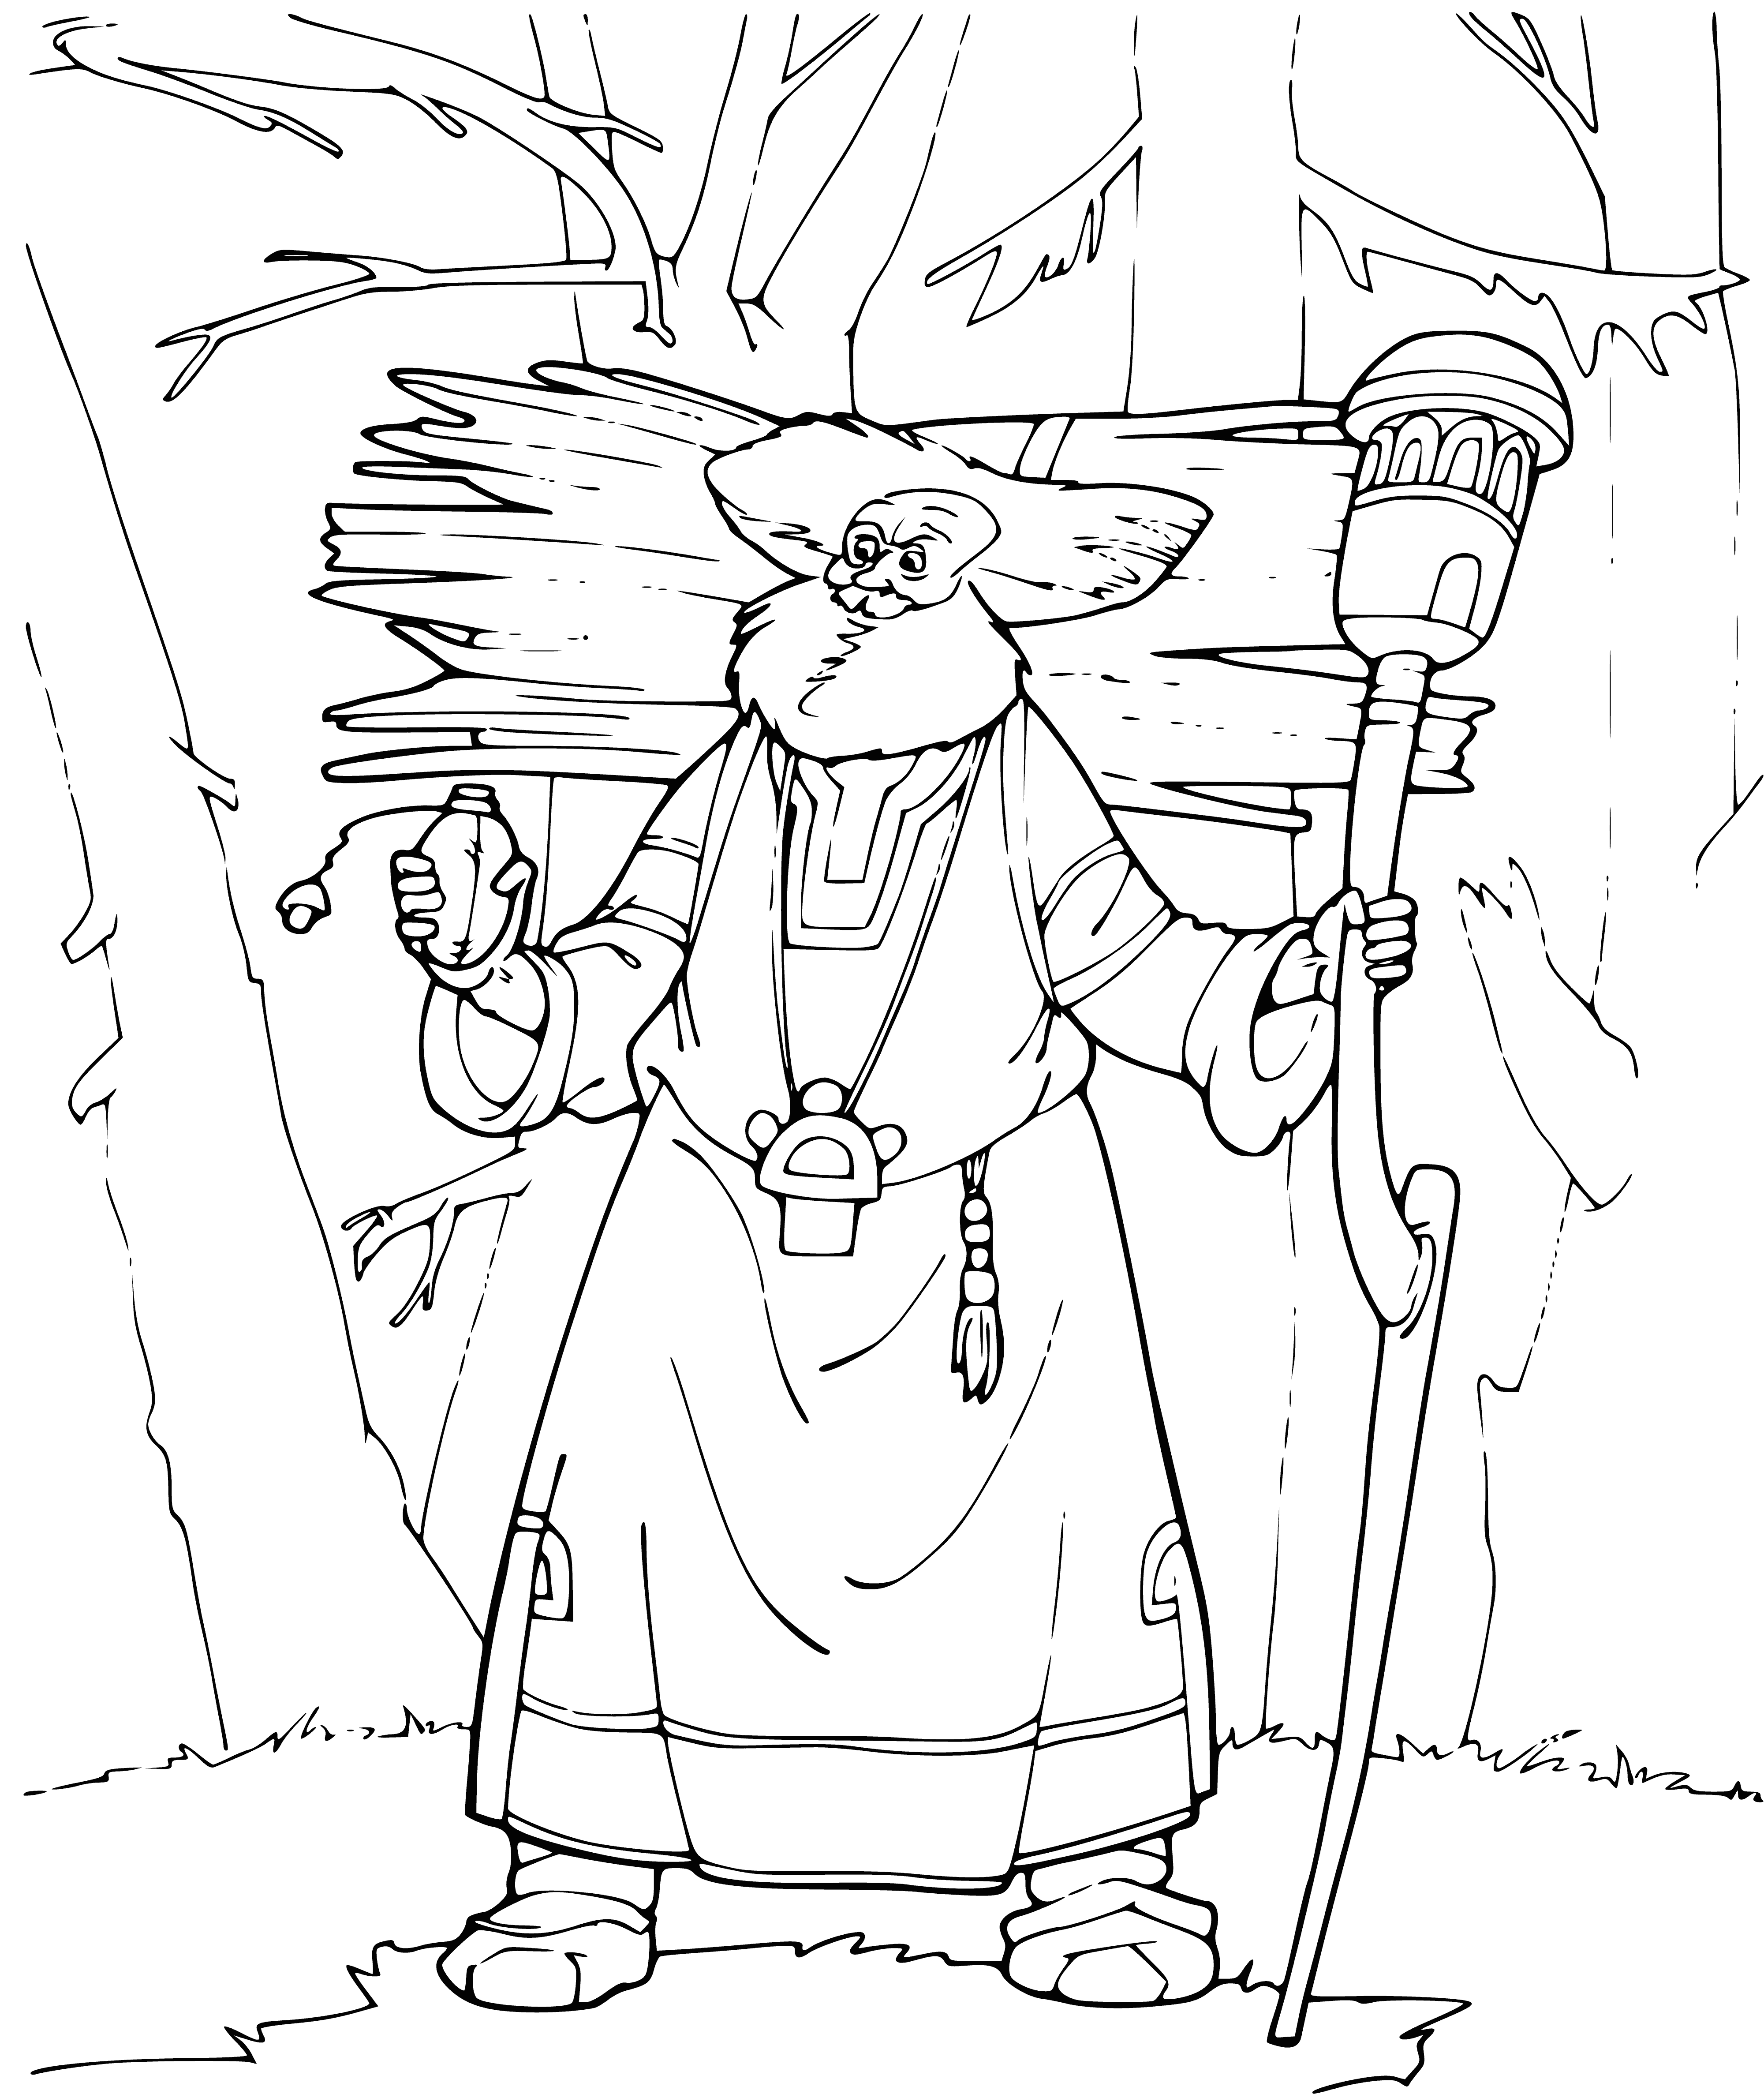 coloring page: An old man with a white beard, yellowing robe and tumors on his face studies a raven in front of a table of books and a lamp.